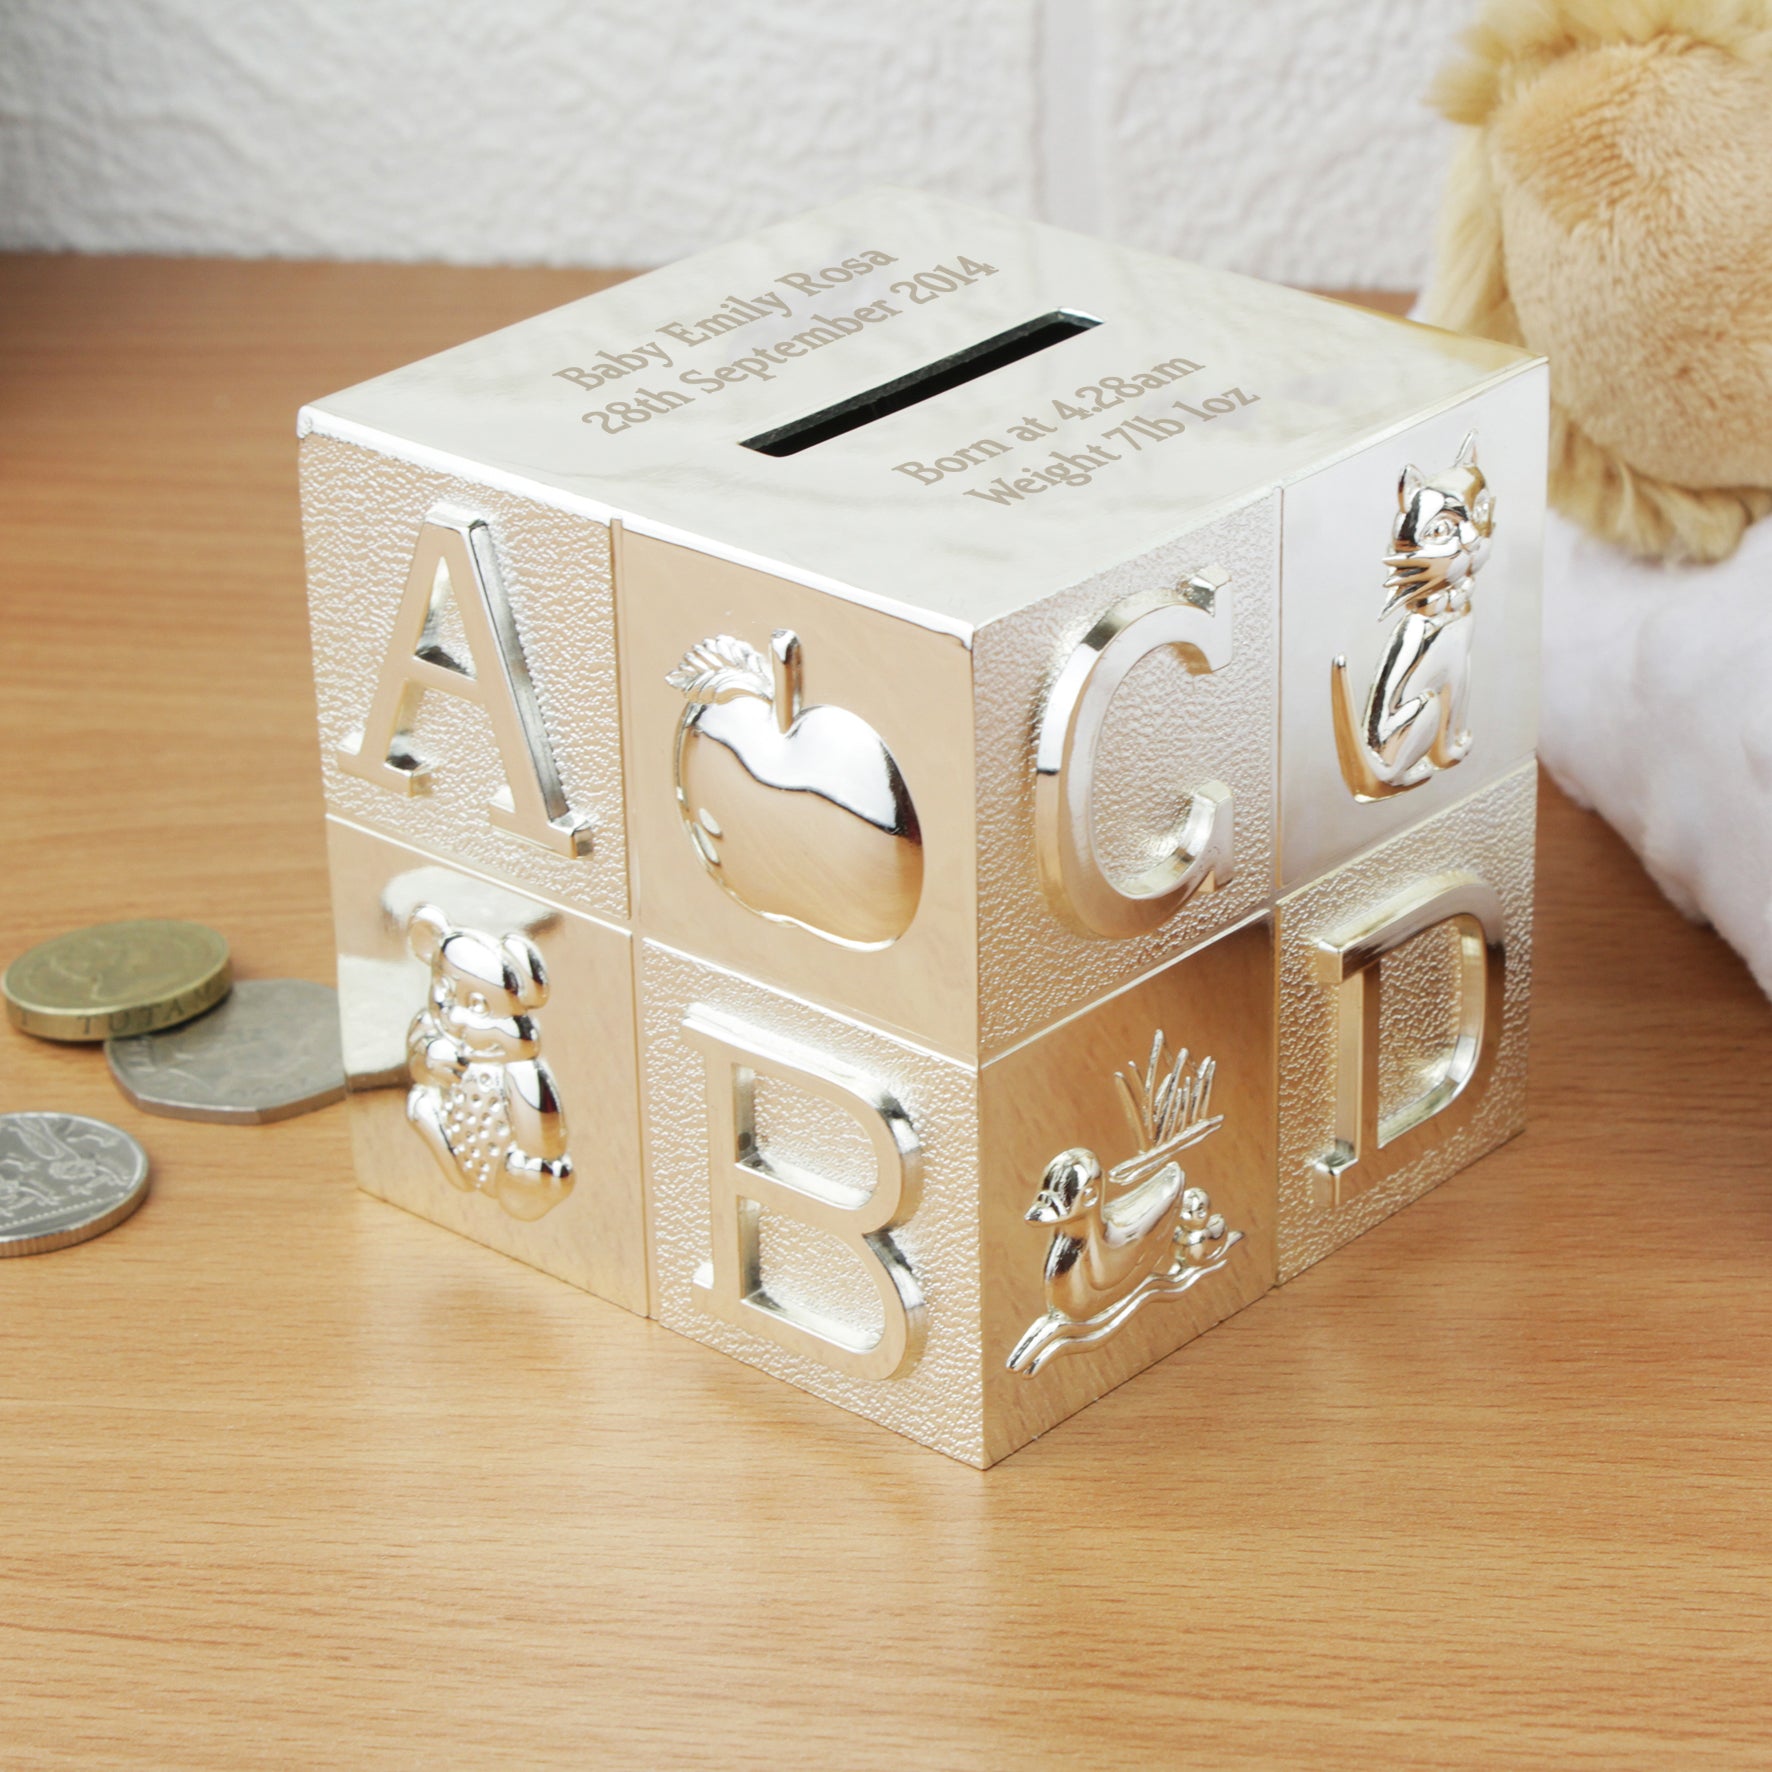 A silver-plated engraved square money box. The money box has an ABCD design on the four sides and the top of the money box has the money slot in it. The money box can be engraved with two lines of text above the money slot and two lines of text below the money slot. This moneybox measures 7.7cm by 7.7cm by 7.7cm.